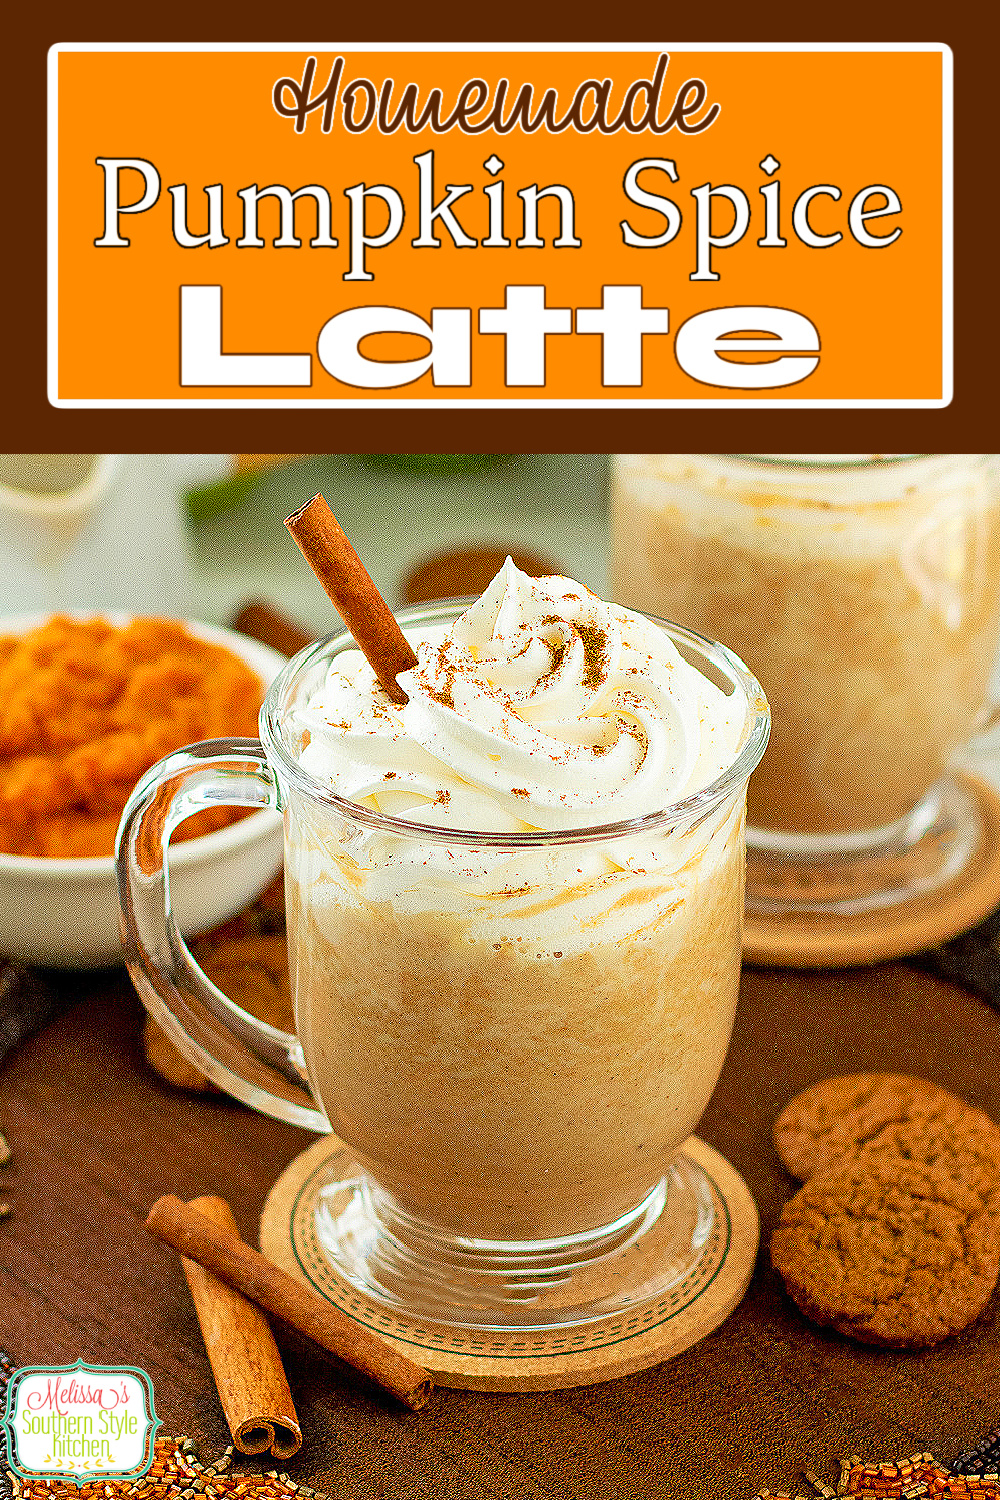 Skip the long line at the drive thru and make this delicious Pumpkin Spice Latte recipe just the way you like it at home #pumpkinlatte #pumpkinspice #pumpkinspicerecipe #pumpkinspicelatte #latterecipe #lattes #starbuckslattes #copycatpumpkinspicelattee via @melissasssk